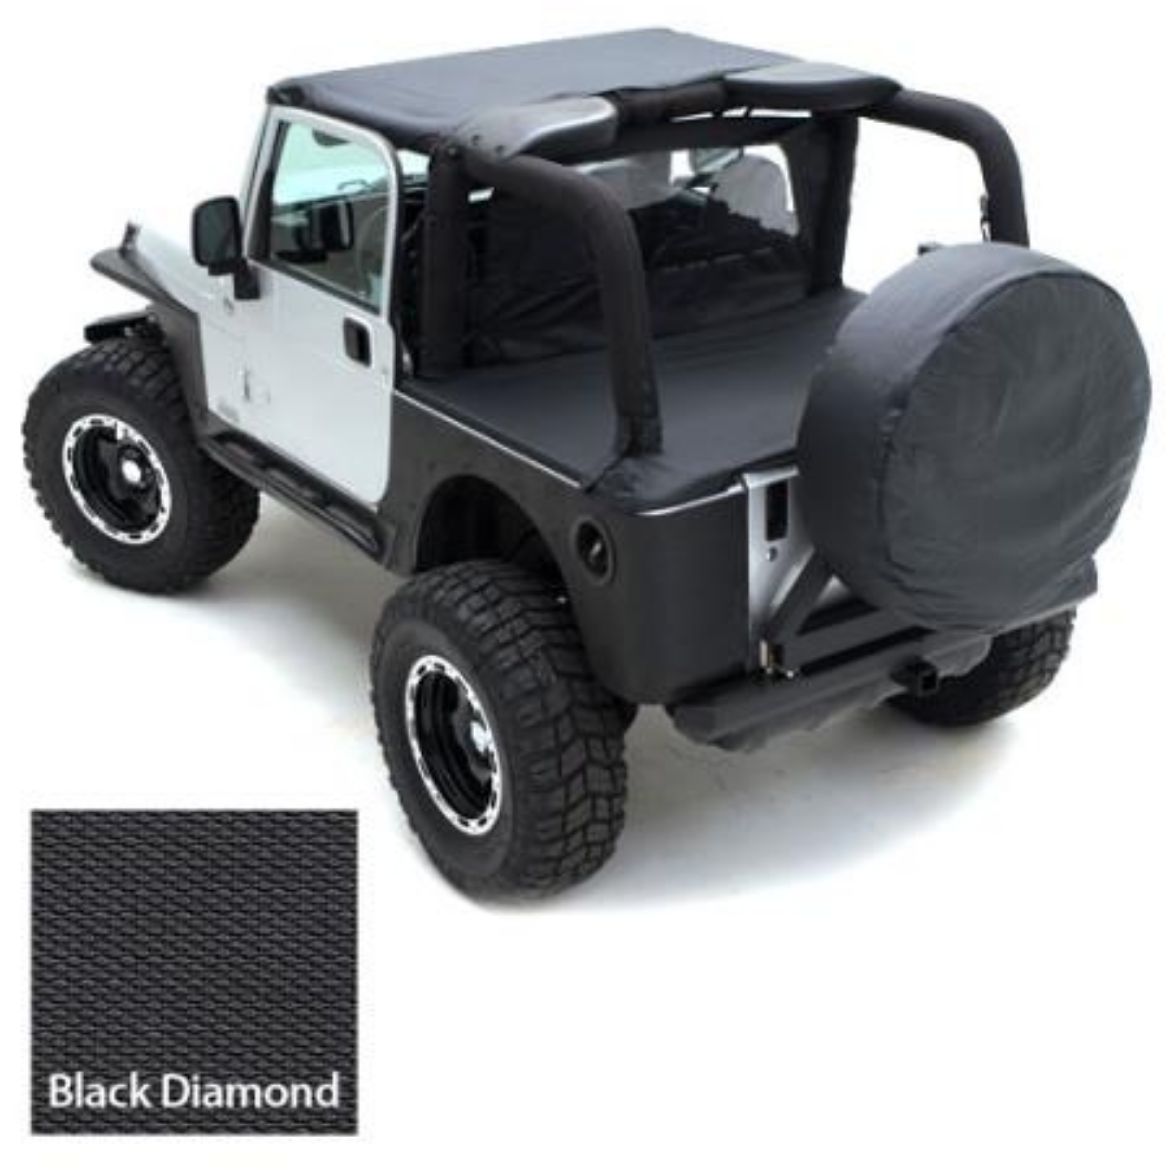 Picture of Tonneau Cover For OEM Soft Top W/Channel Mount 04-06 Wrangler LJ Unlimited Black Diamond Smittybilt